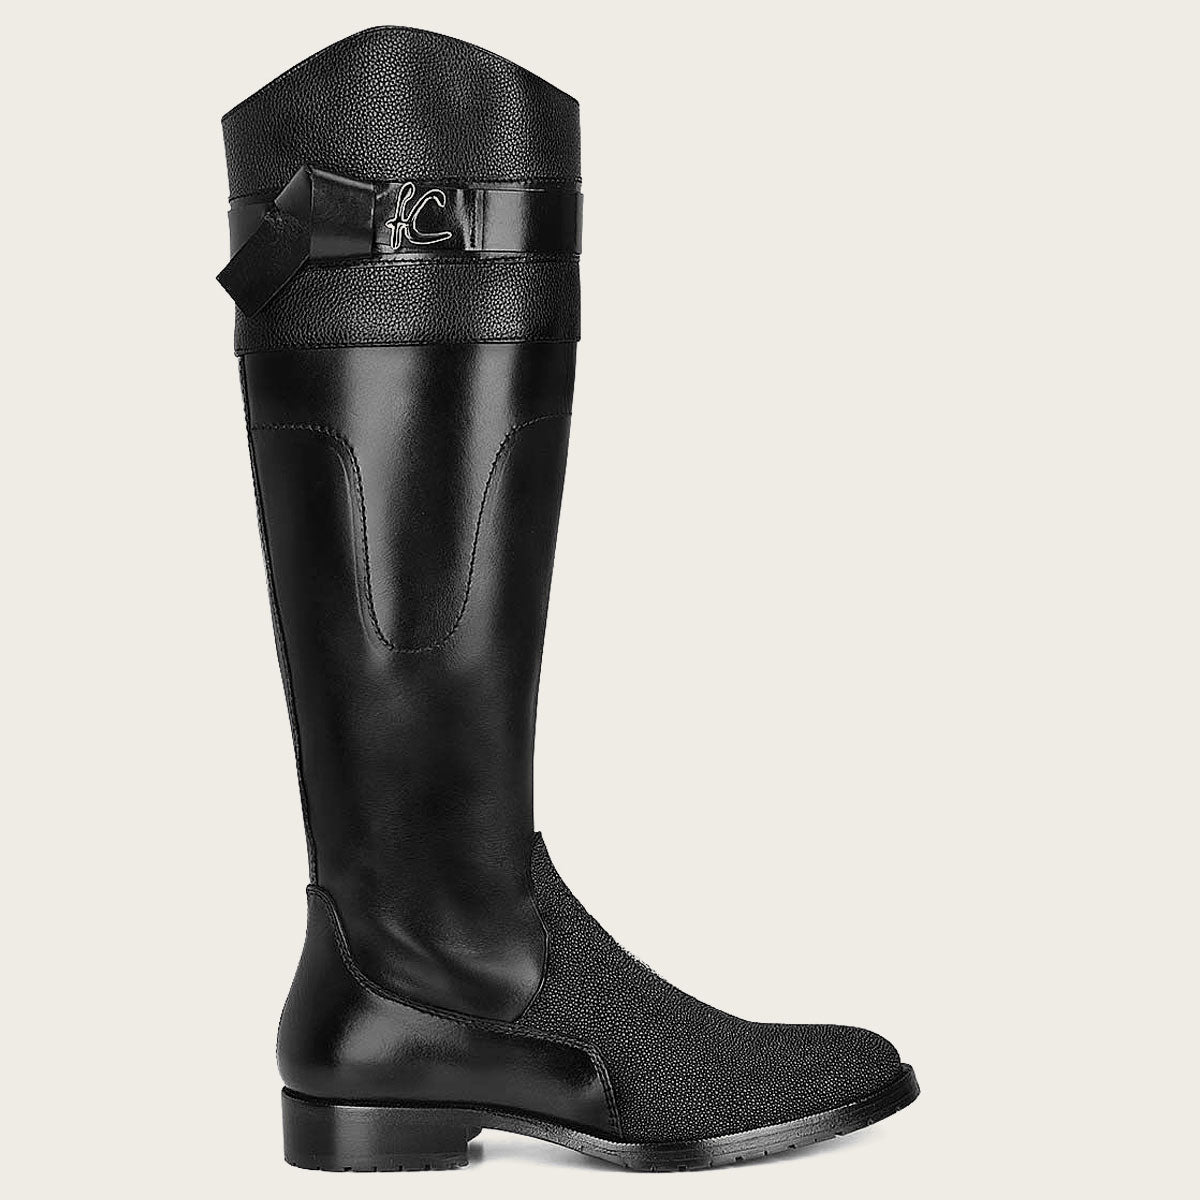 A sleek black riding boot made from exotic stingray leather, perfect for the fashion-forward equestrian.